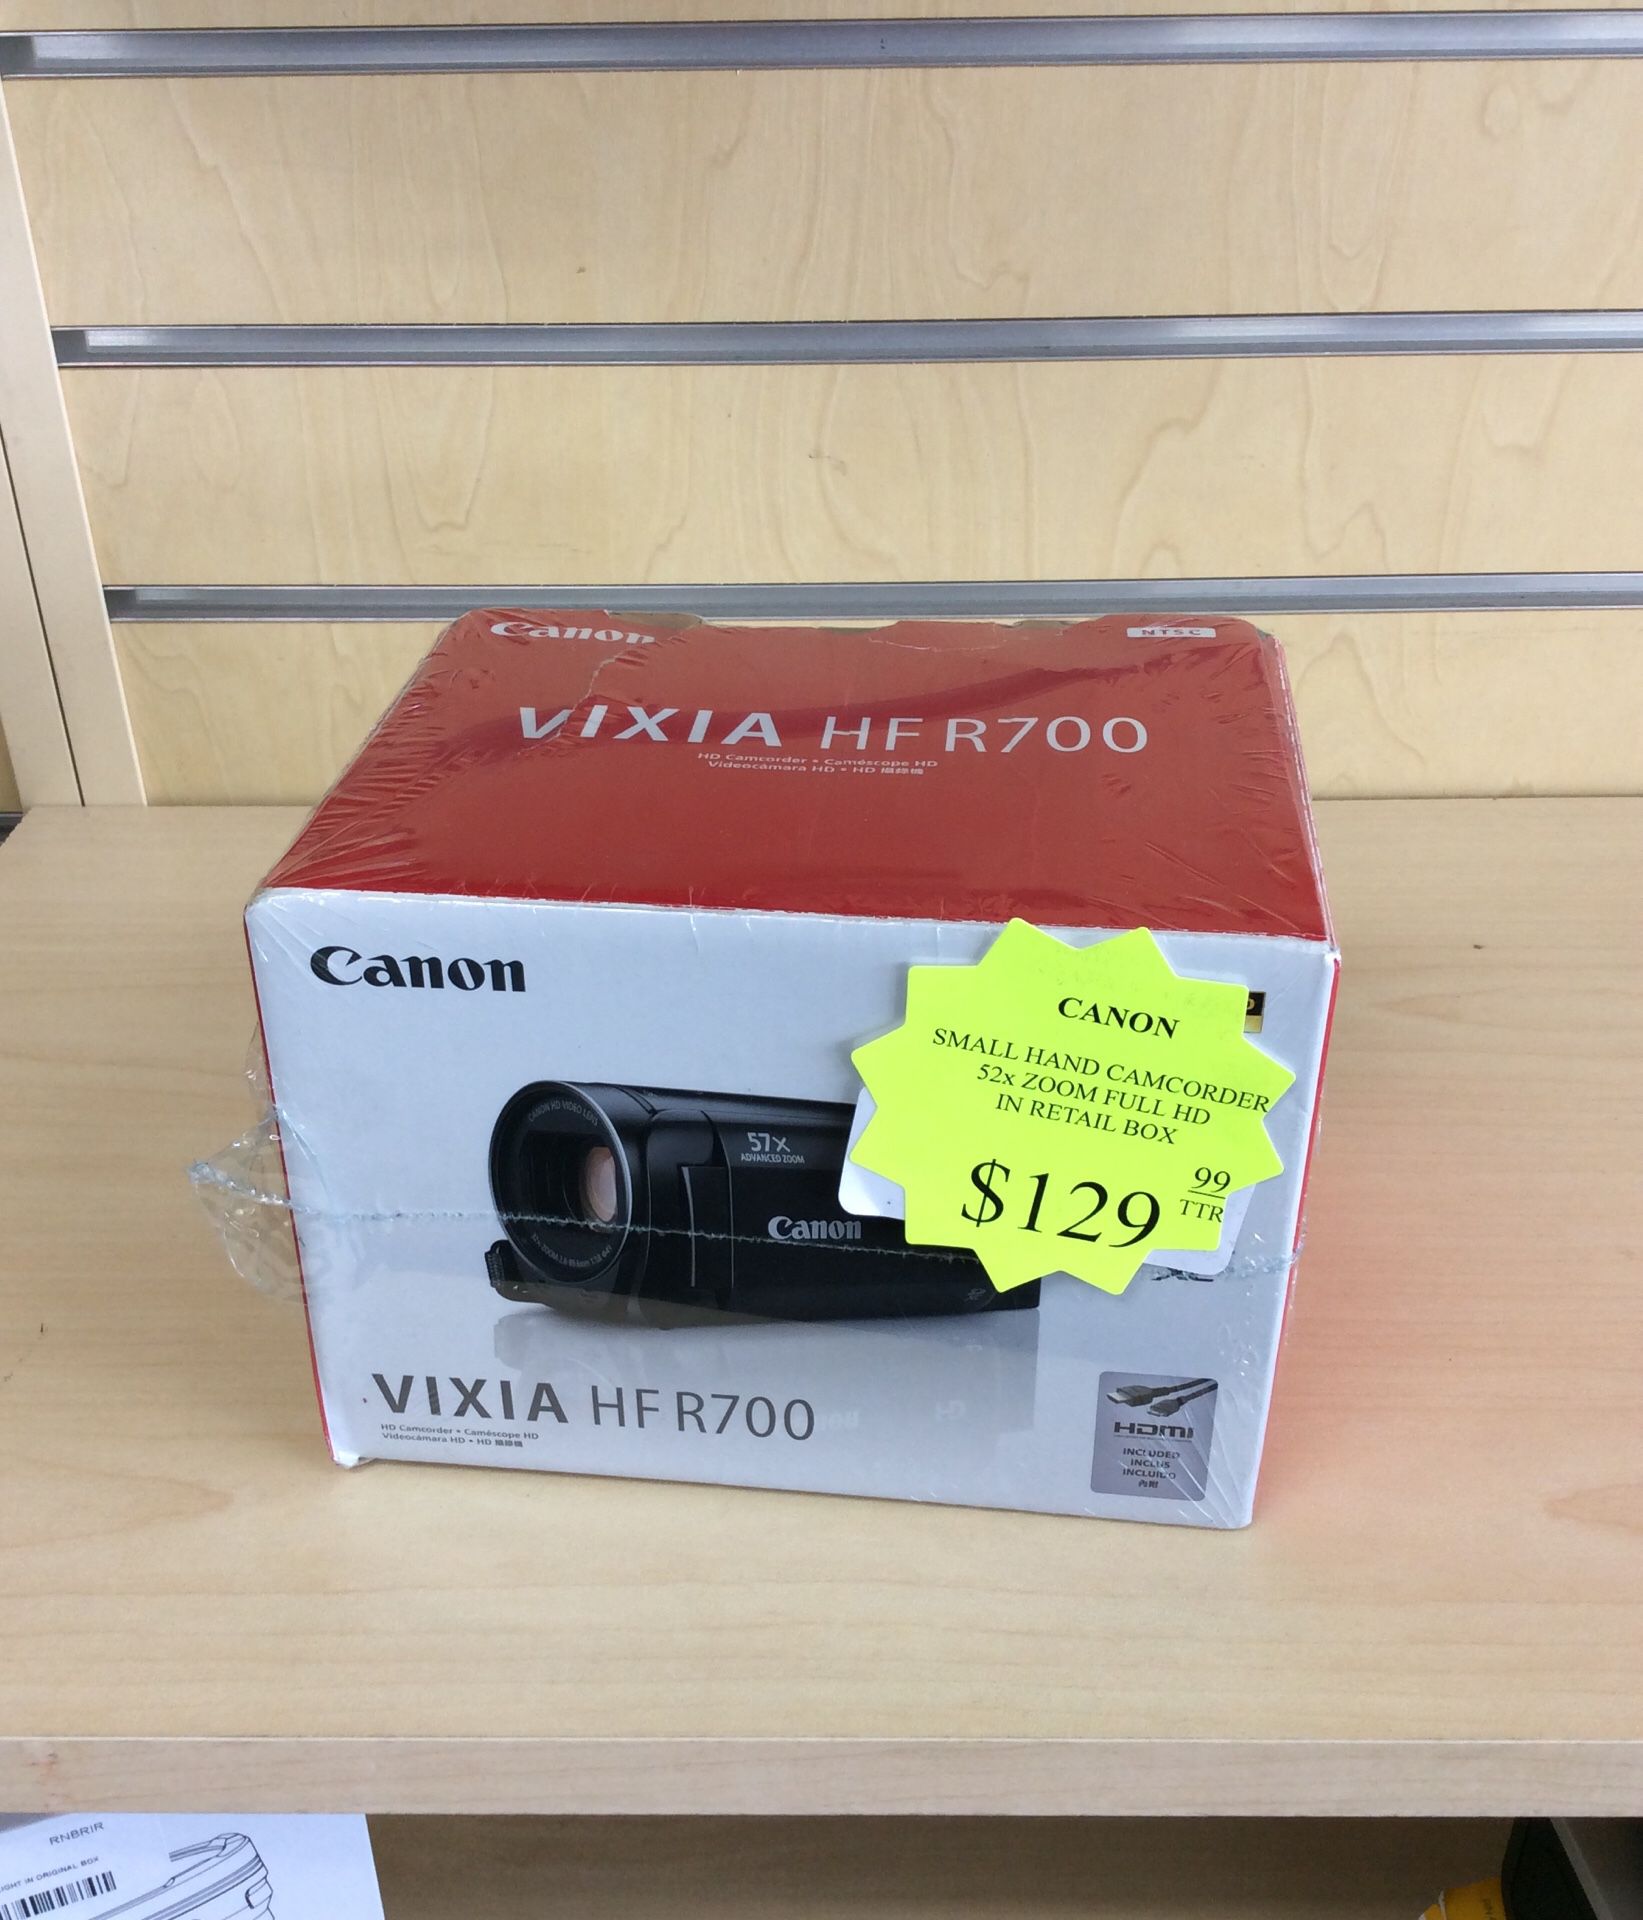 Canon small hand cam corder 52x zoom full HD in retail box inventory code 939-155-1139